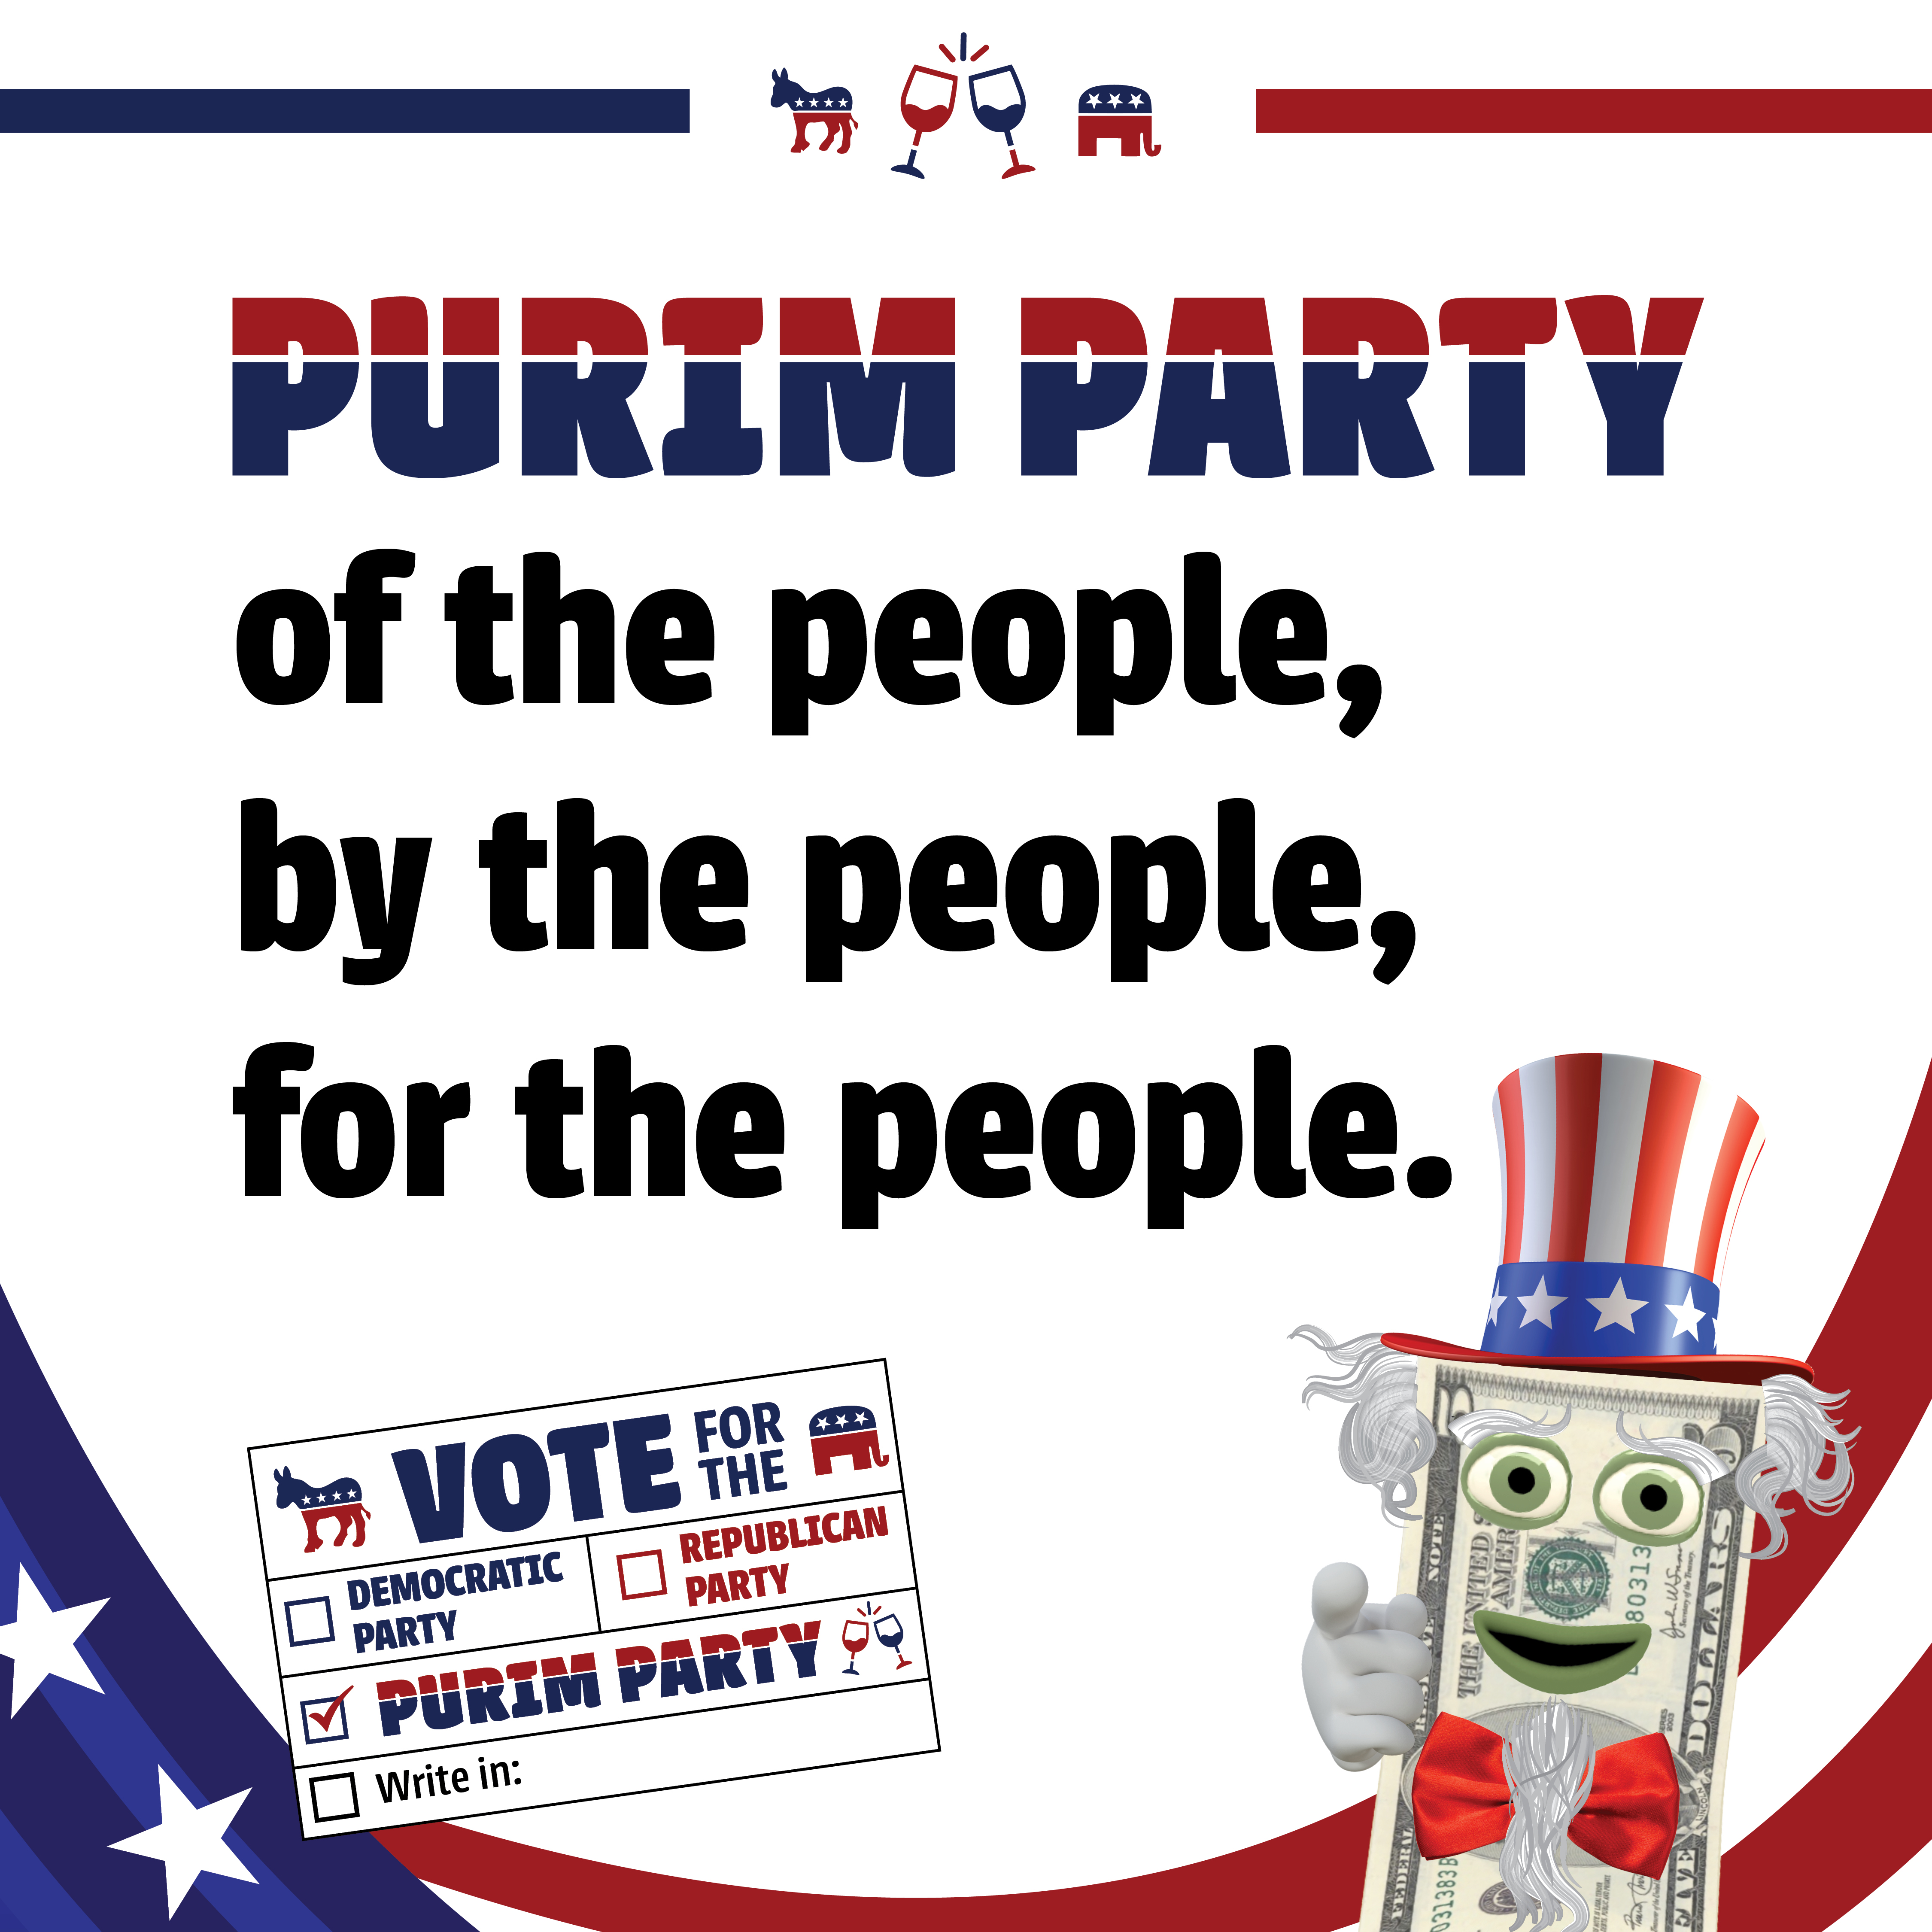 Purim Party: of the people, by the people, for the people.